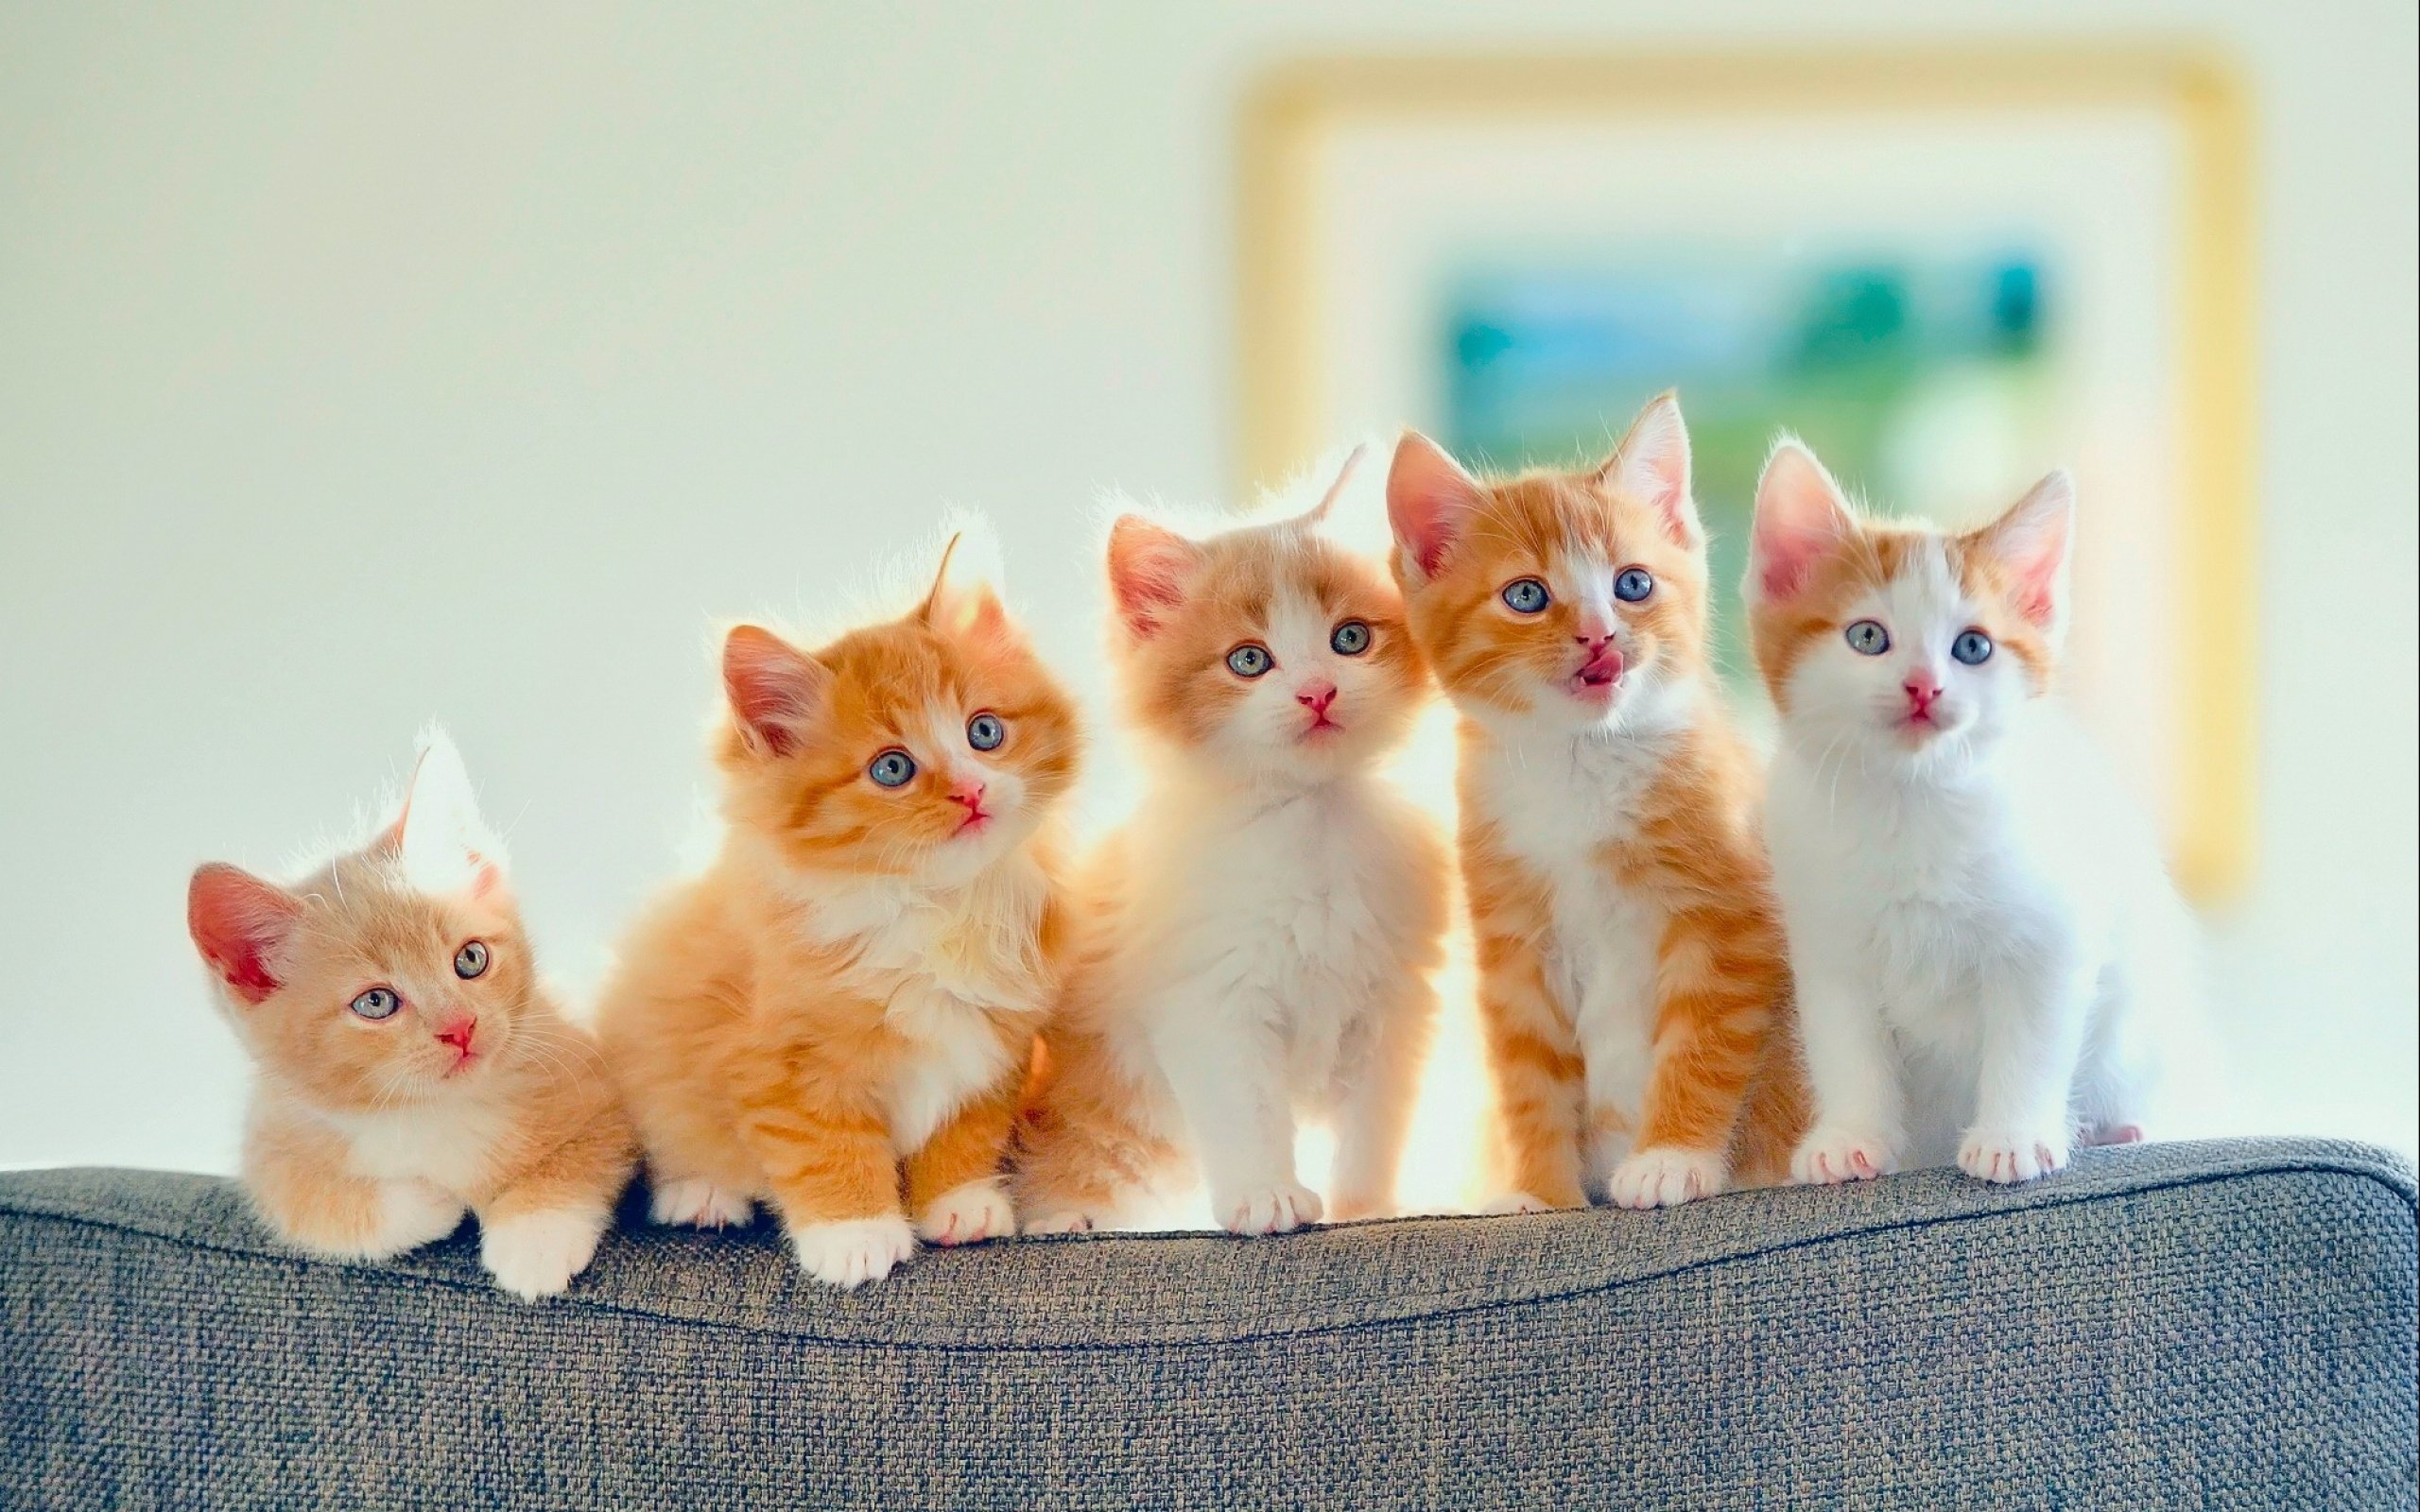 Download wallpaper American Wirehair Cat, family, pets, kittens, cute animals, ginger cats, domestic cats, American Wirehair for desktop with resolution 2560x1600. High Quality HD picture wallpaper